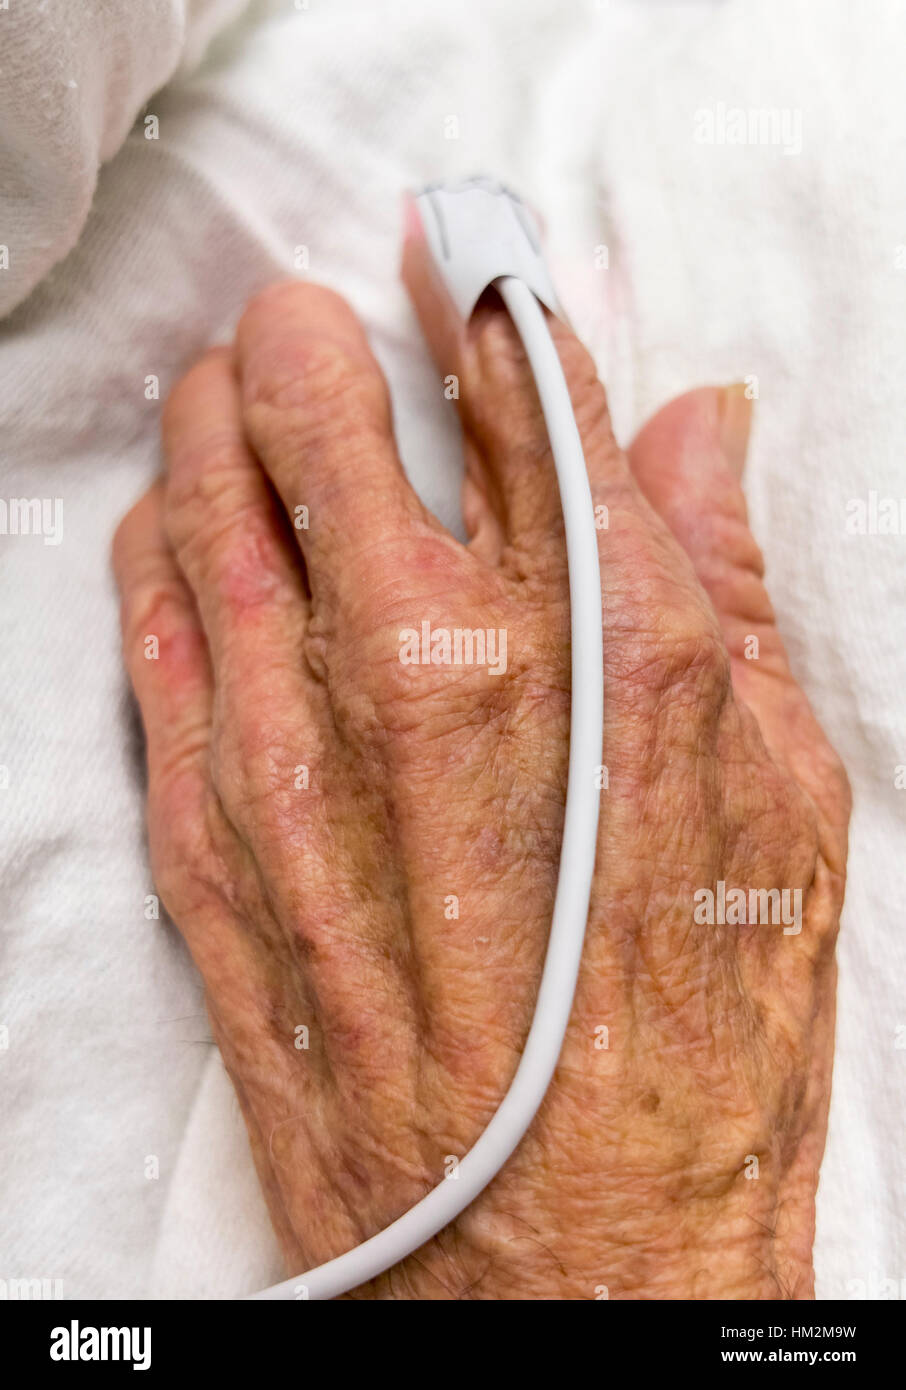 Elderly hand with a pulse meter on index finger. Stock Photo